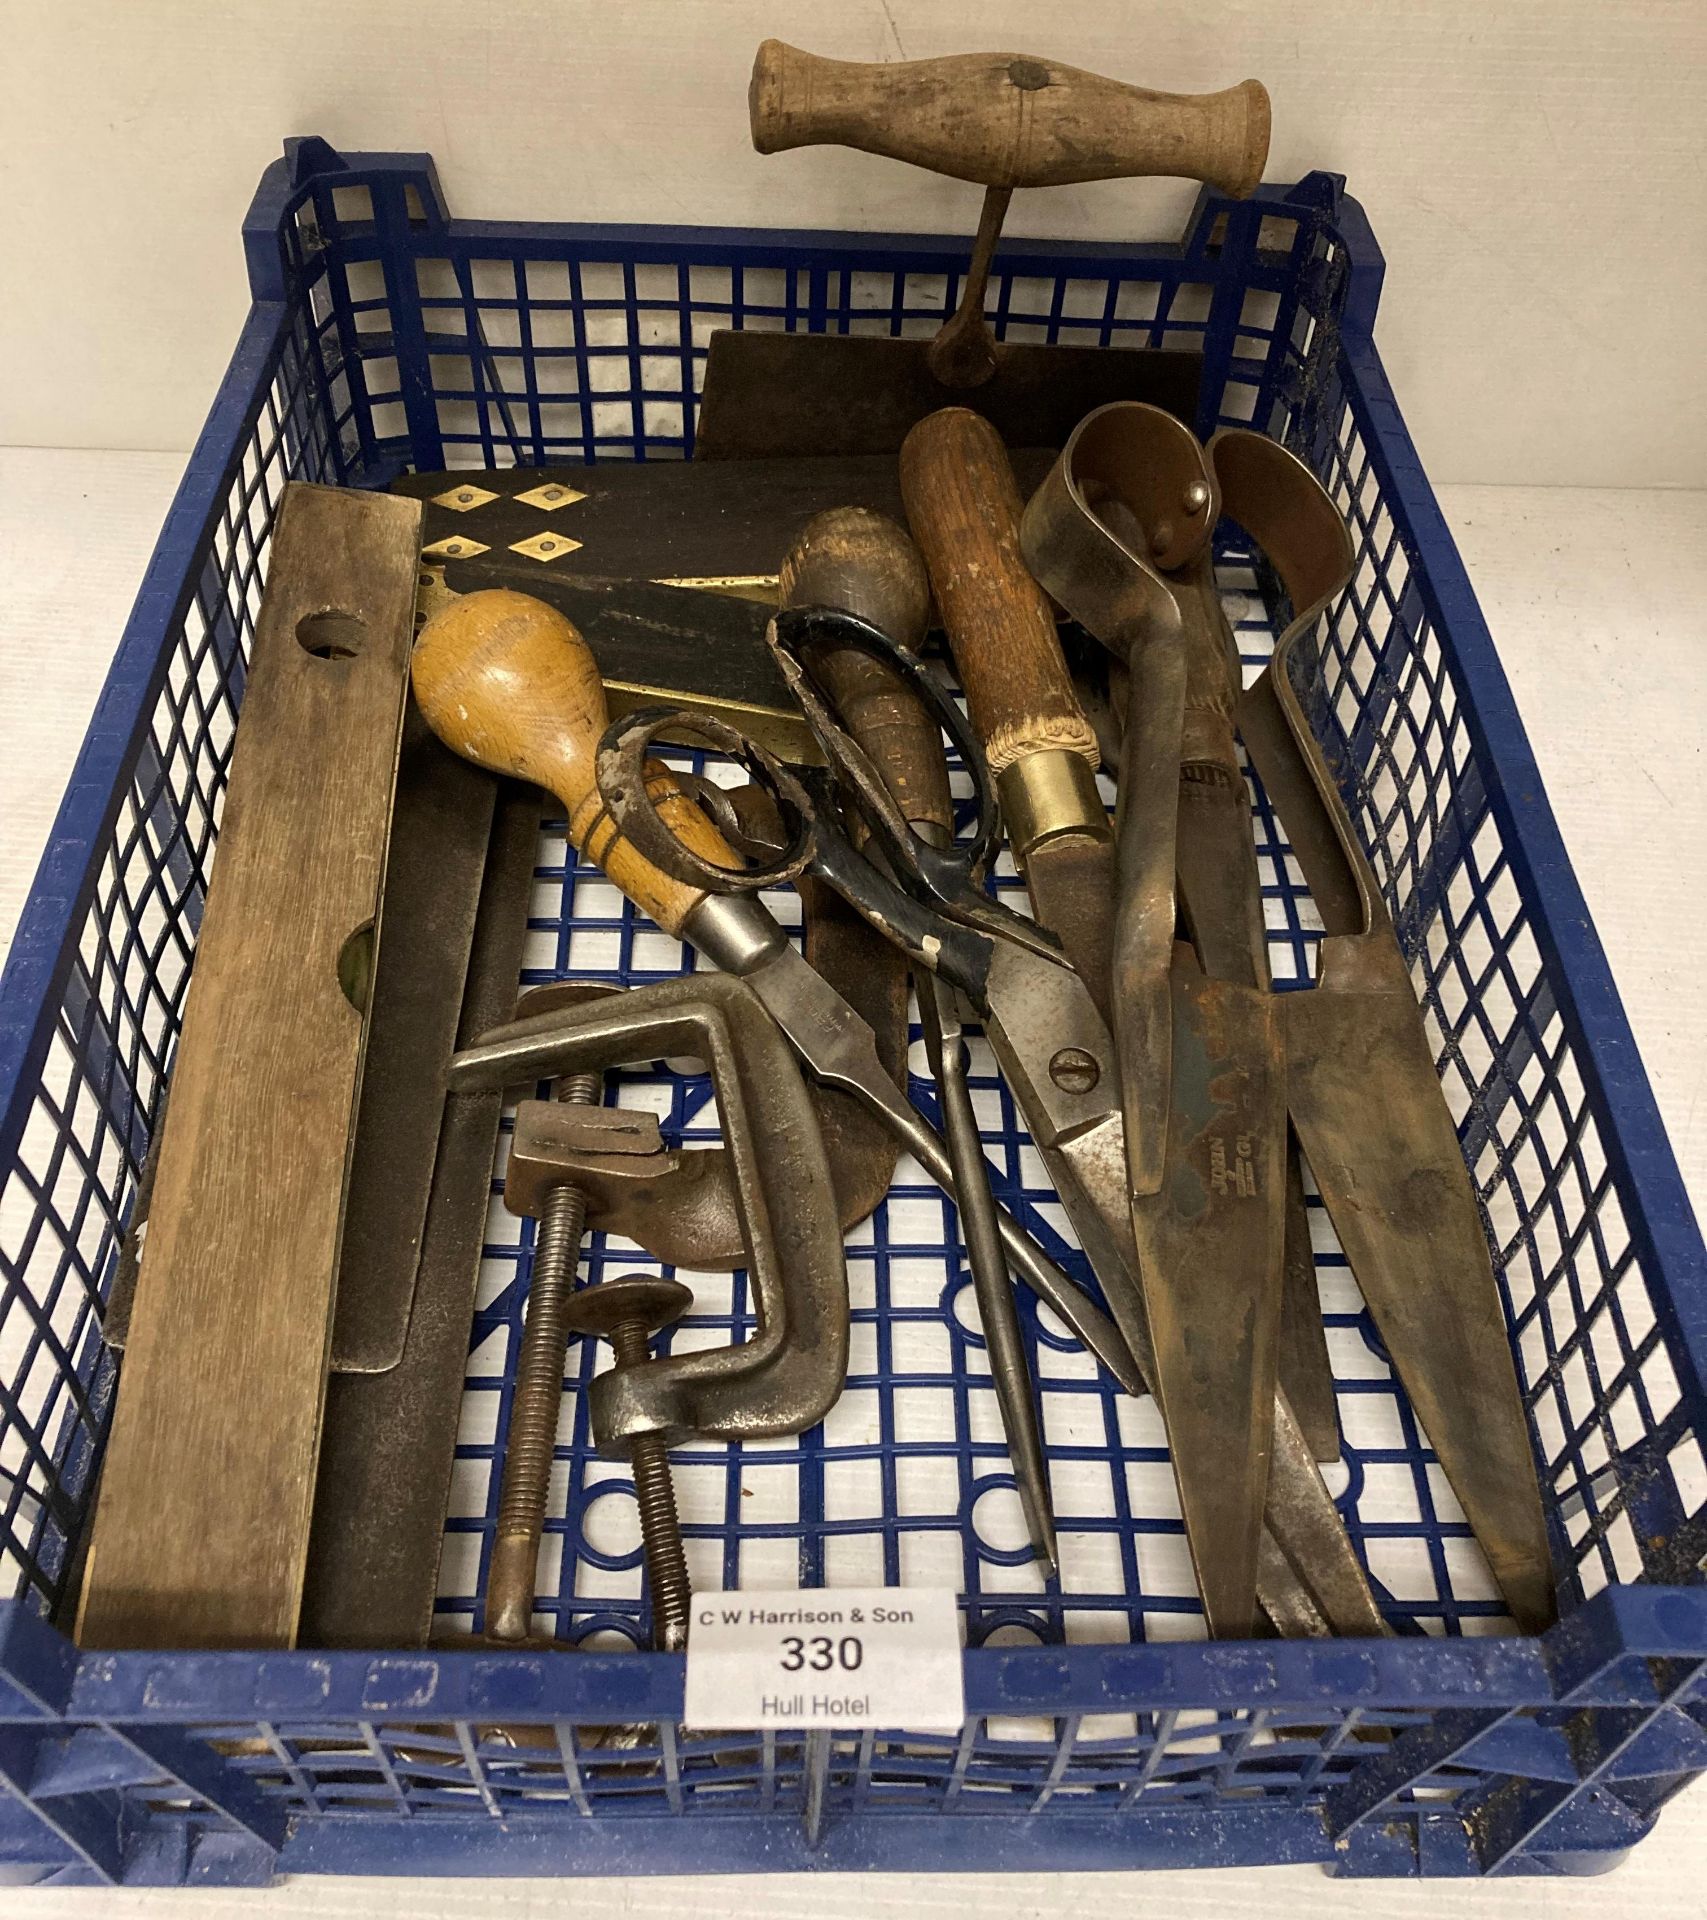 Contents to crate - 13 x assorted hand tools including screw drivers, dough cutter, sheep shears,